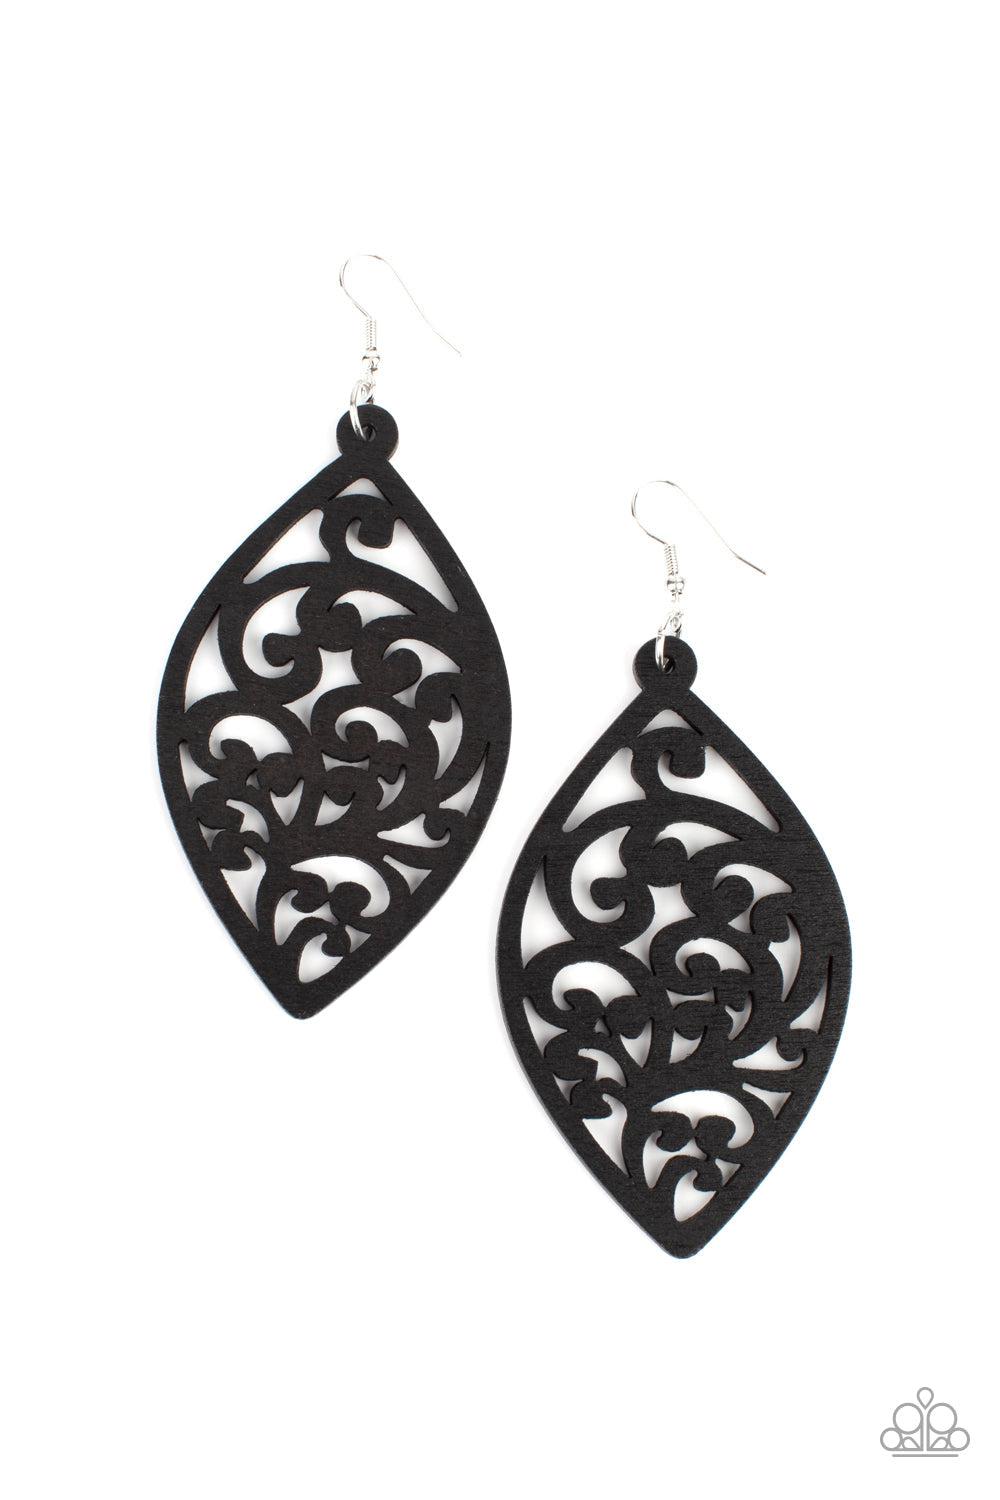 Coral Garden Black Wood Earrings - Paparazzi Accessories- lightbox - CarasShop.com - $5 Jewelry by Cara Jewels